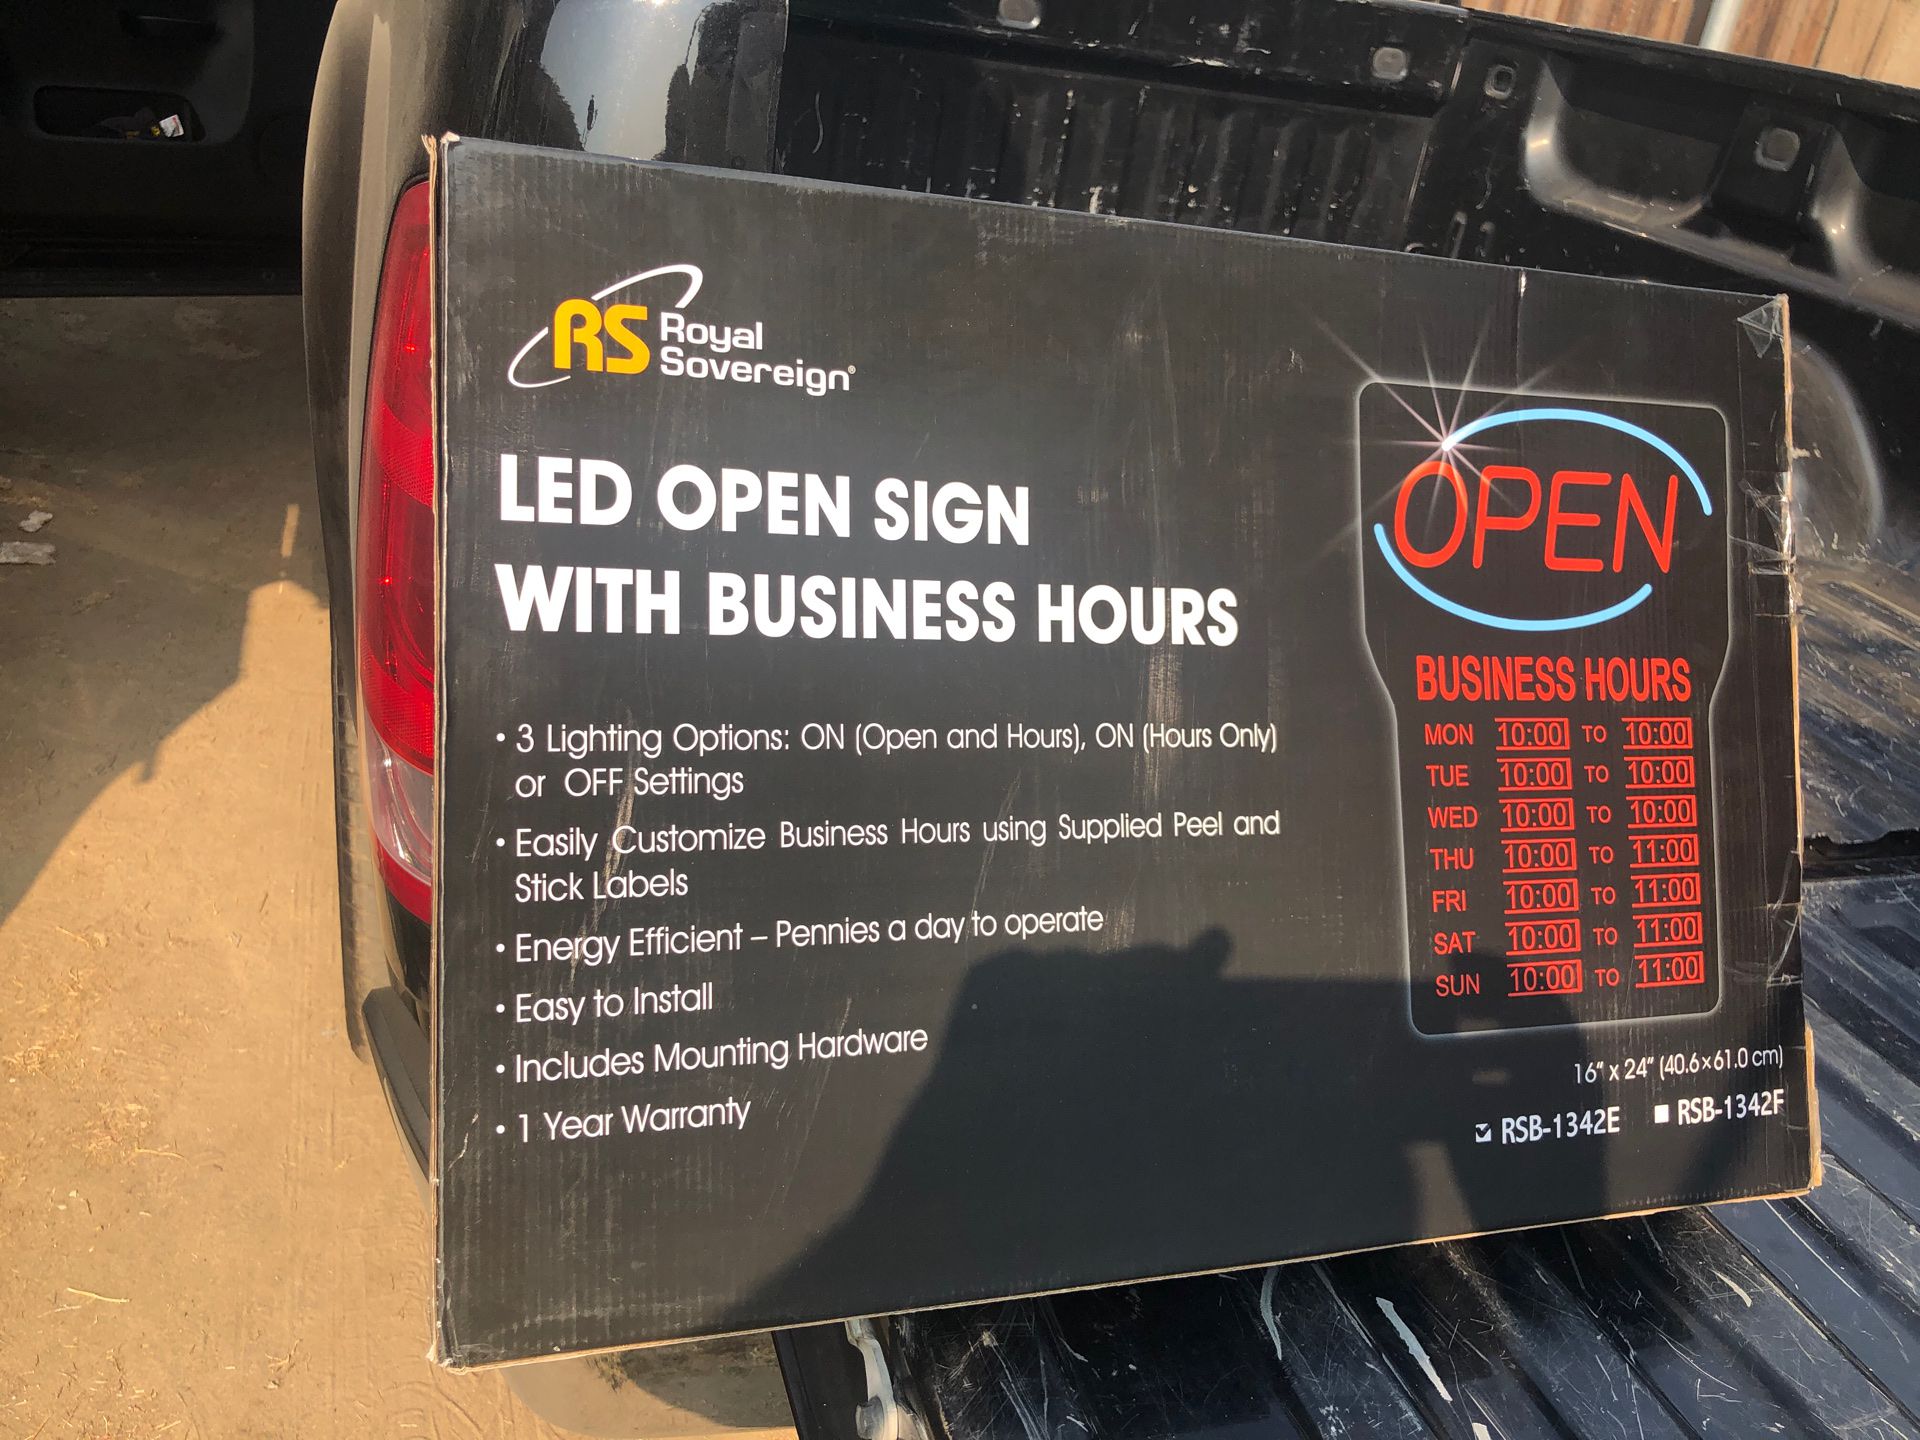 Open sign with business hours